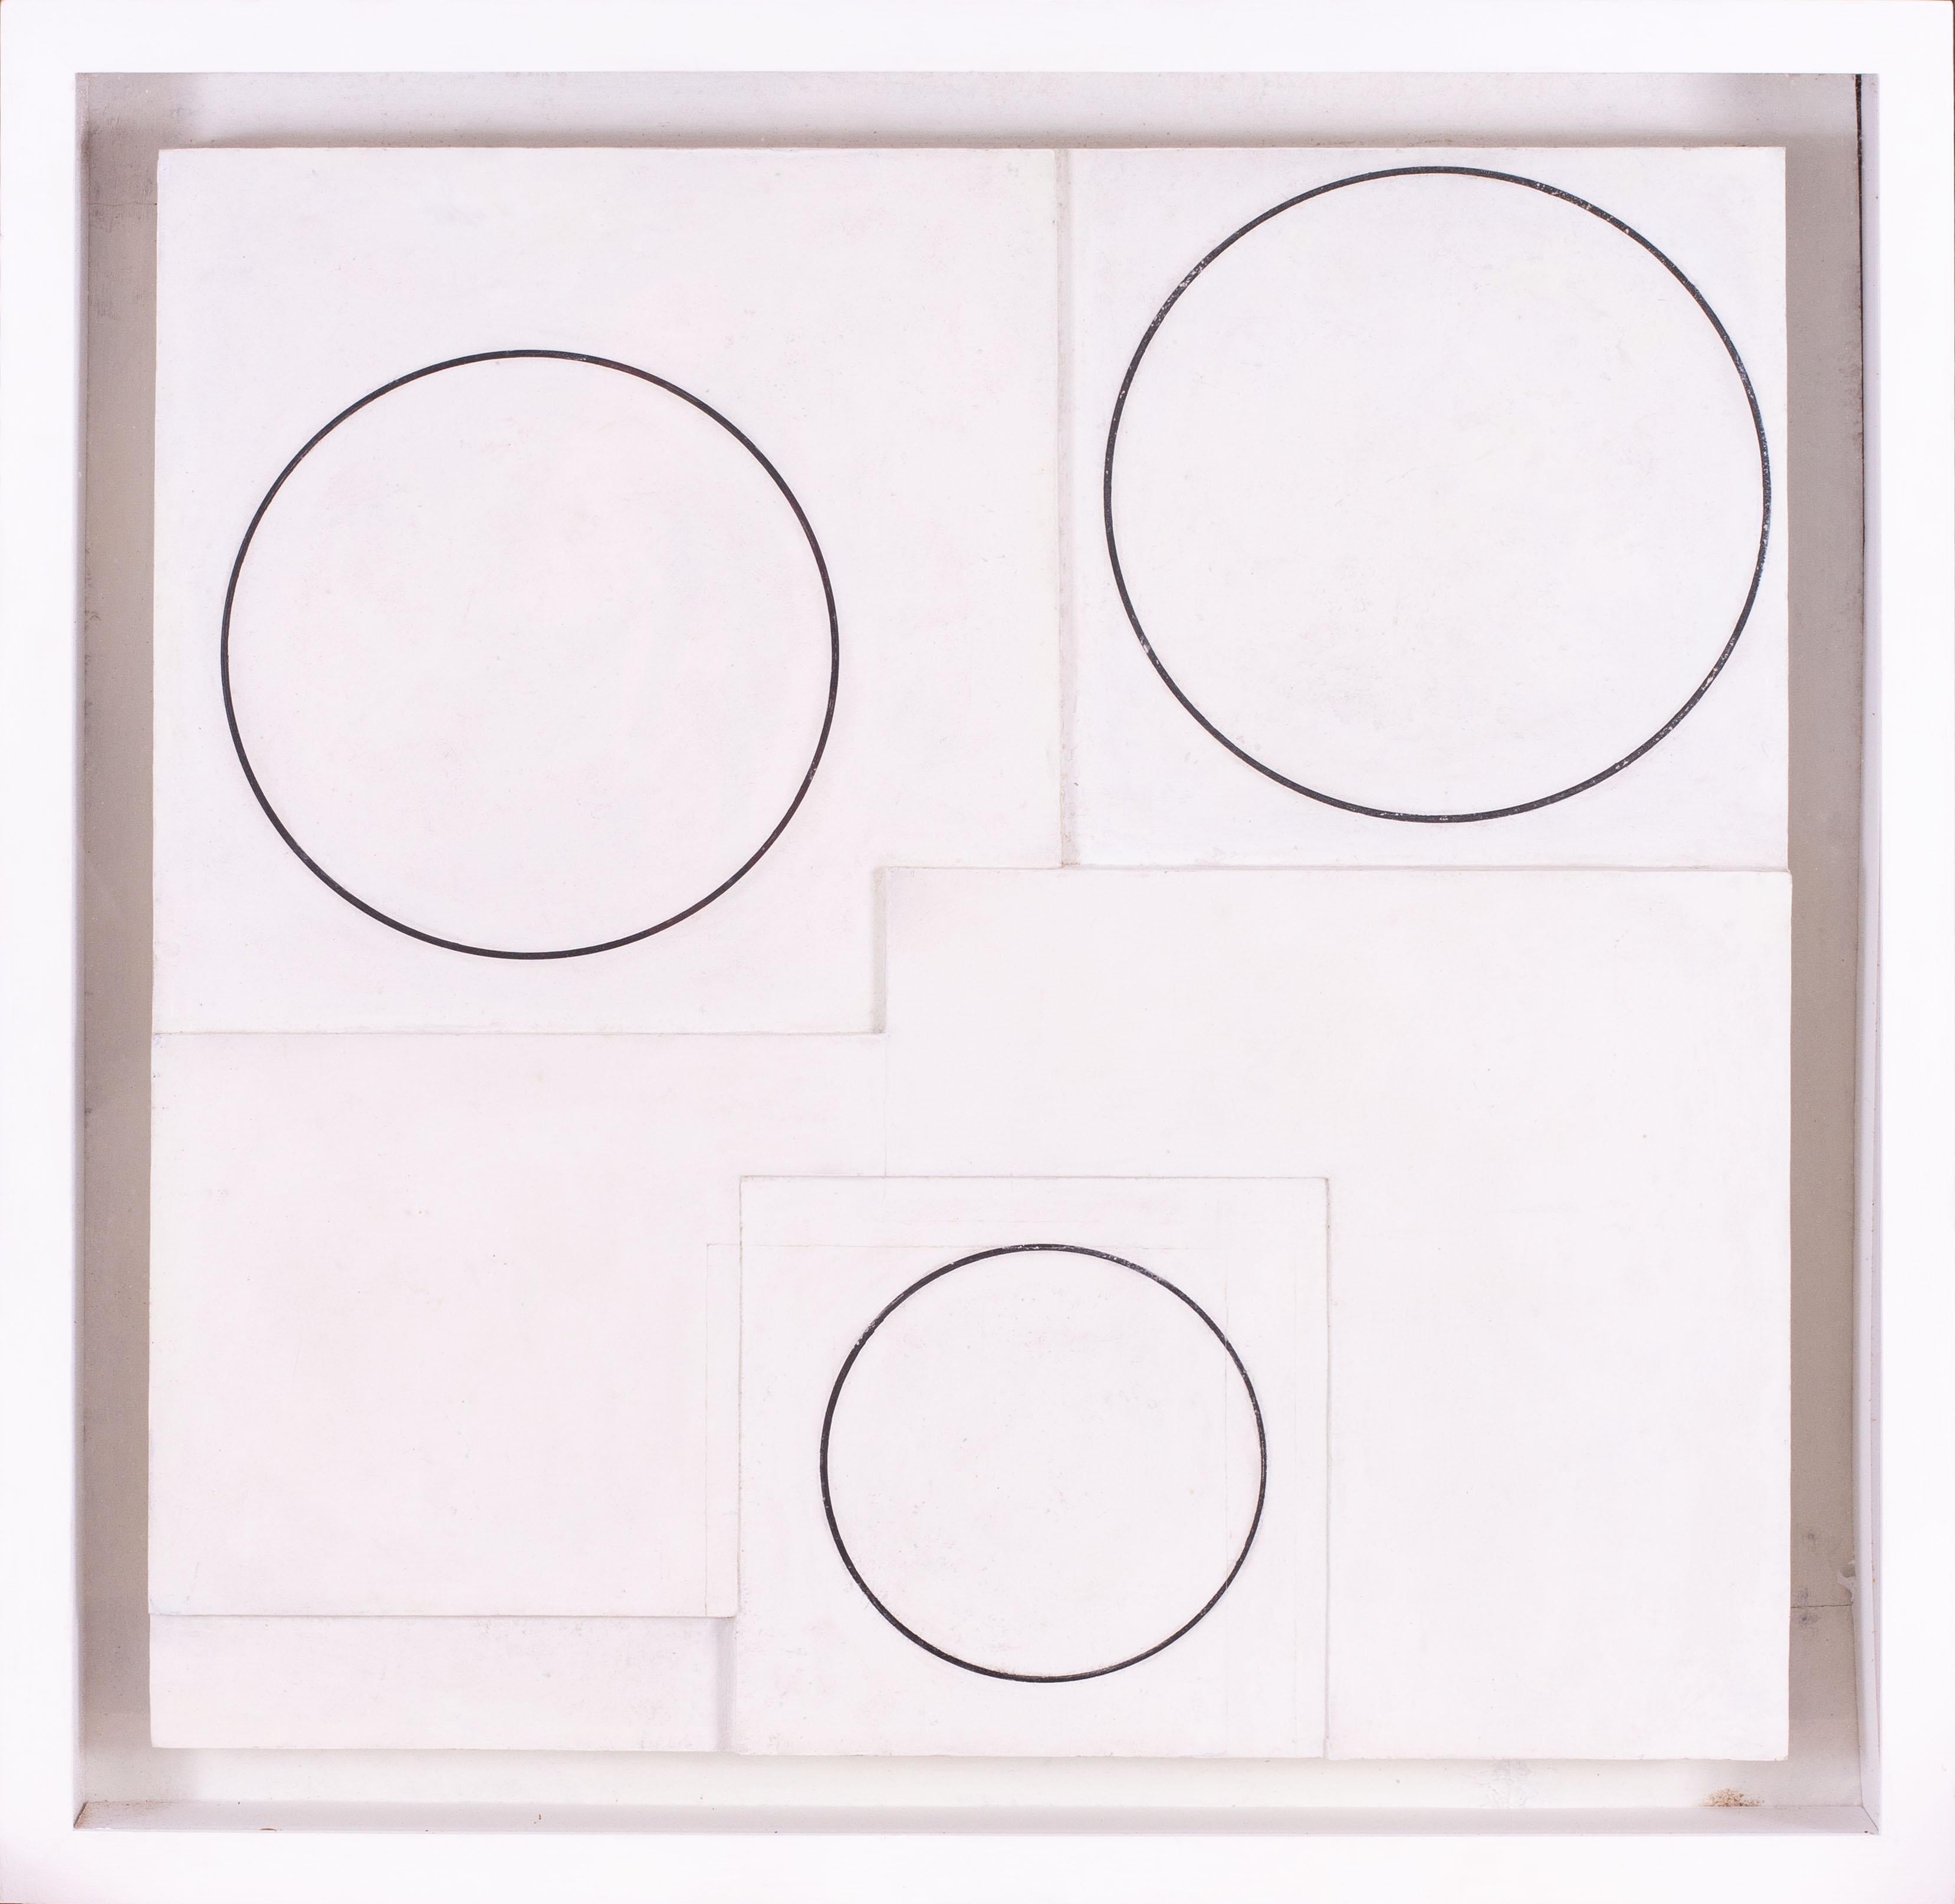 A very stylish mid 20th Century assemblage work by Cornish St.Ives artist David Andrew 'Three Circles'.

The details of the work are as follows:
David Andrew (British, 1934)
Three Circles
Oil on wooden board, assemblage
29.1/2 x 29.1/2 in. (75 x